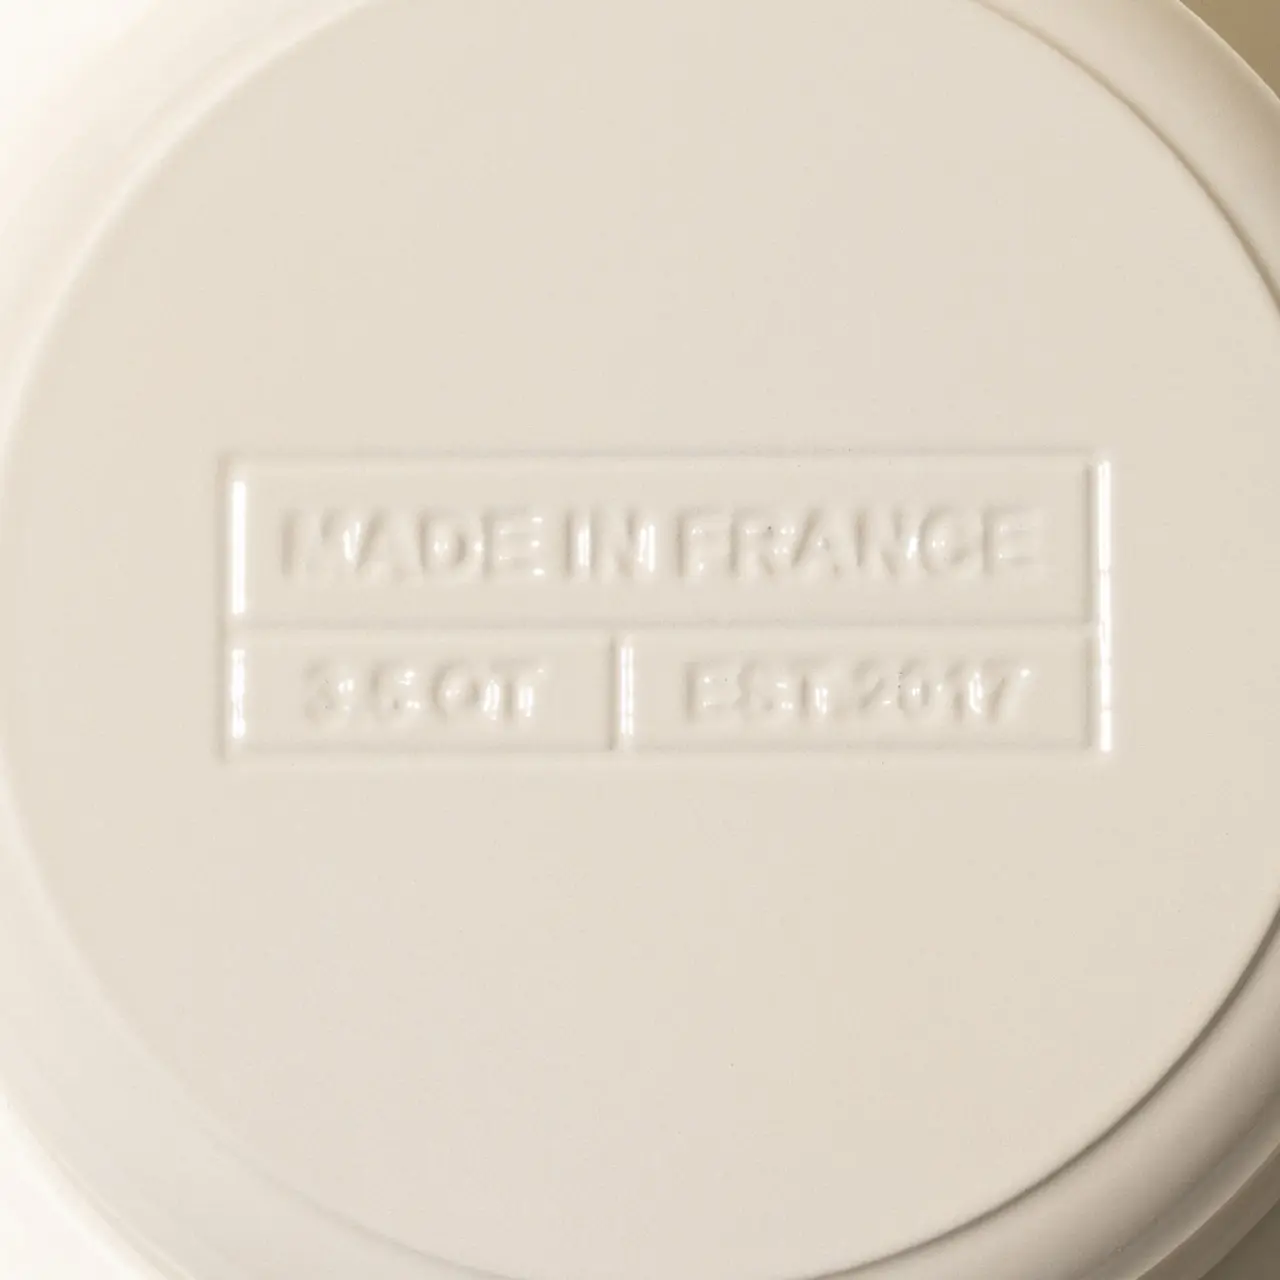 Close-up of the embossed bottom of a porcelain item with "Made in France" and additional markings indicating size and model year.